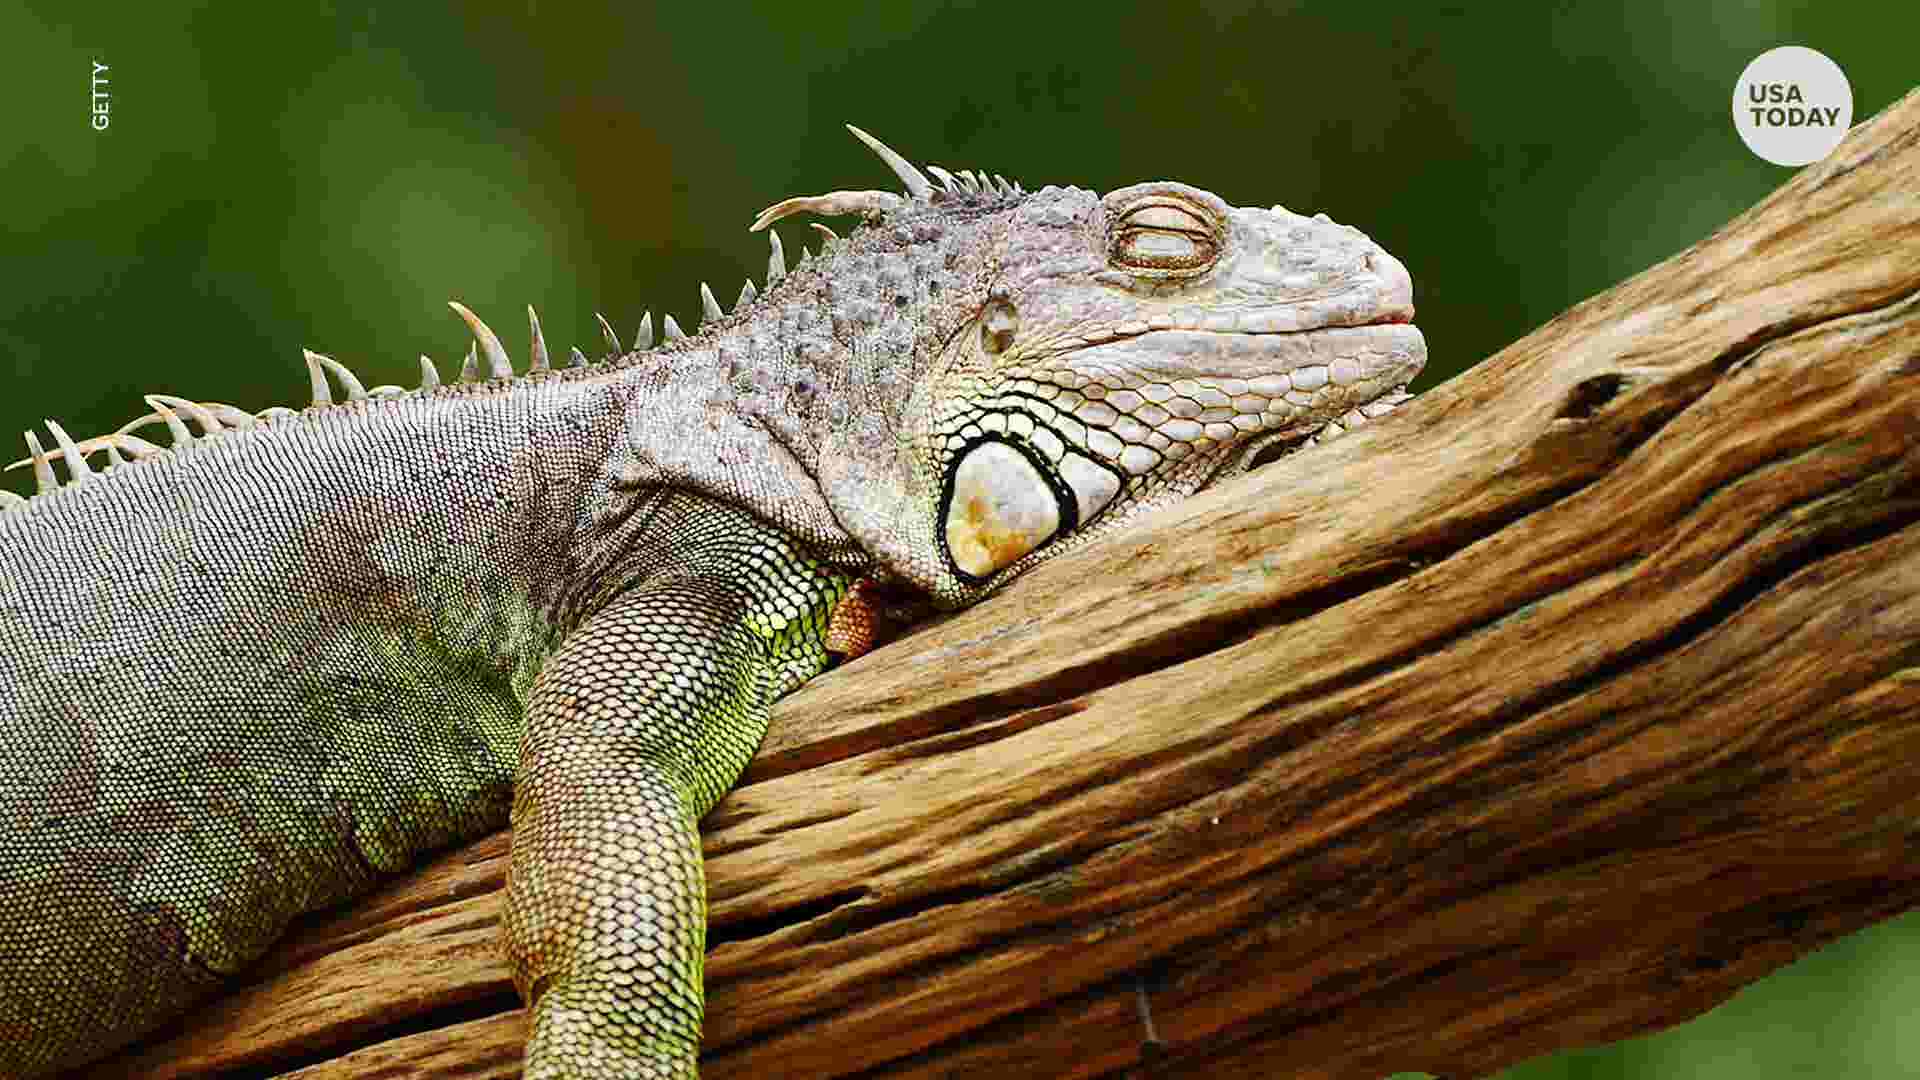 'Falling iguana' alert issued in Florida due to cold temperatures1920 x 1080